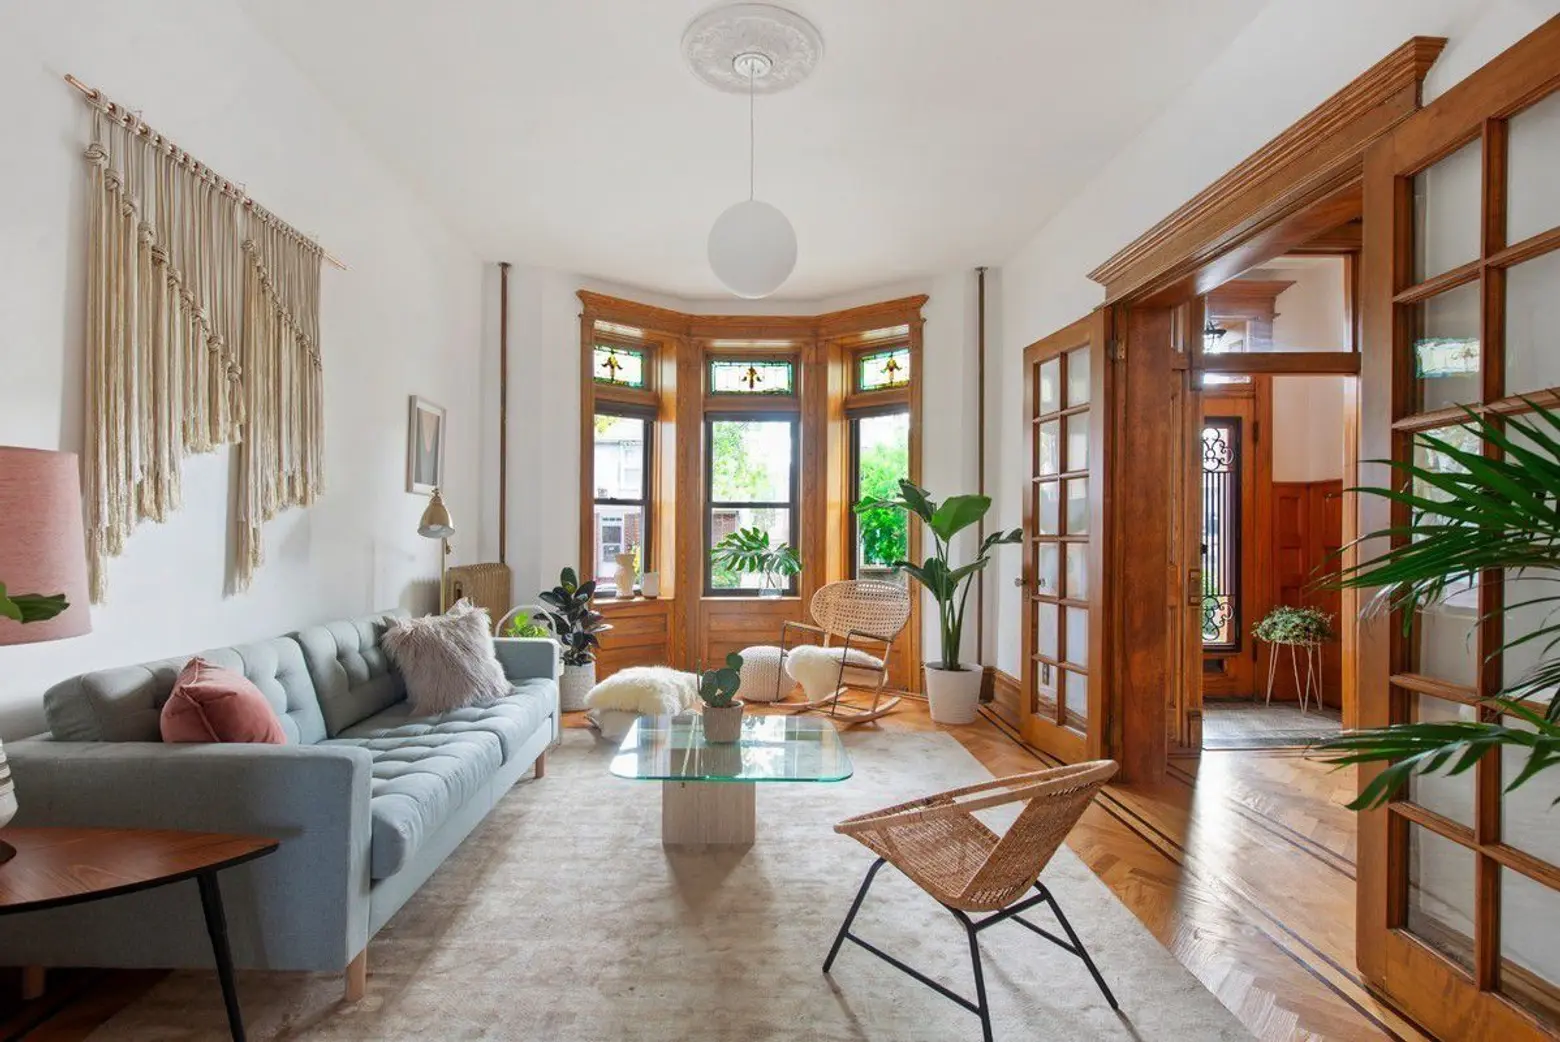 With coffered ceilings, skylights, and a backyard, this Bay Ridge home is asking $1.4M